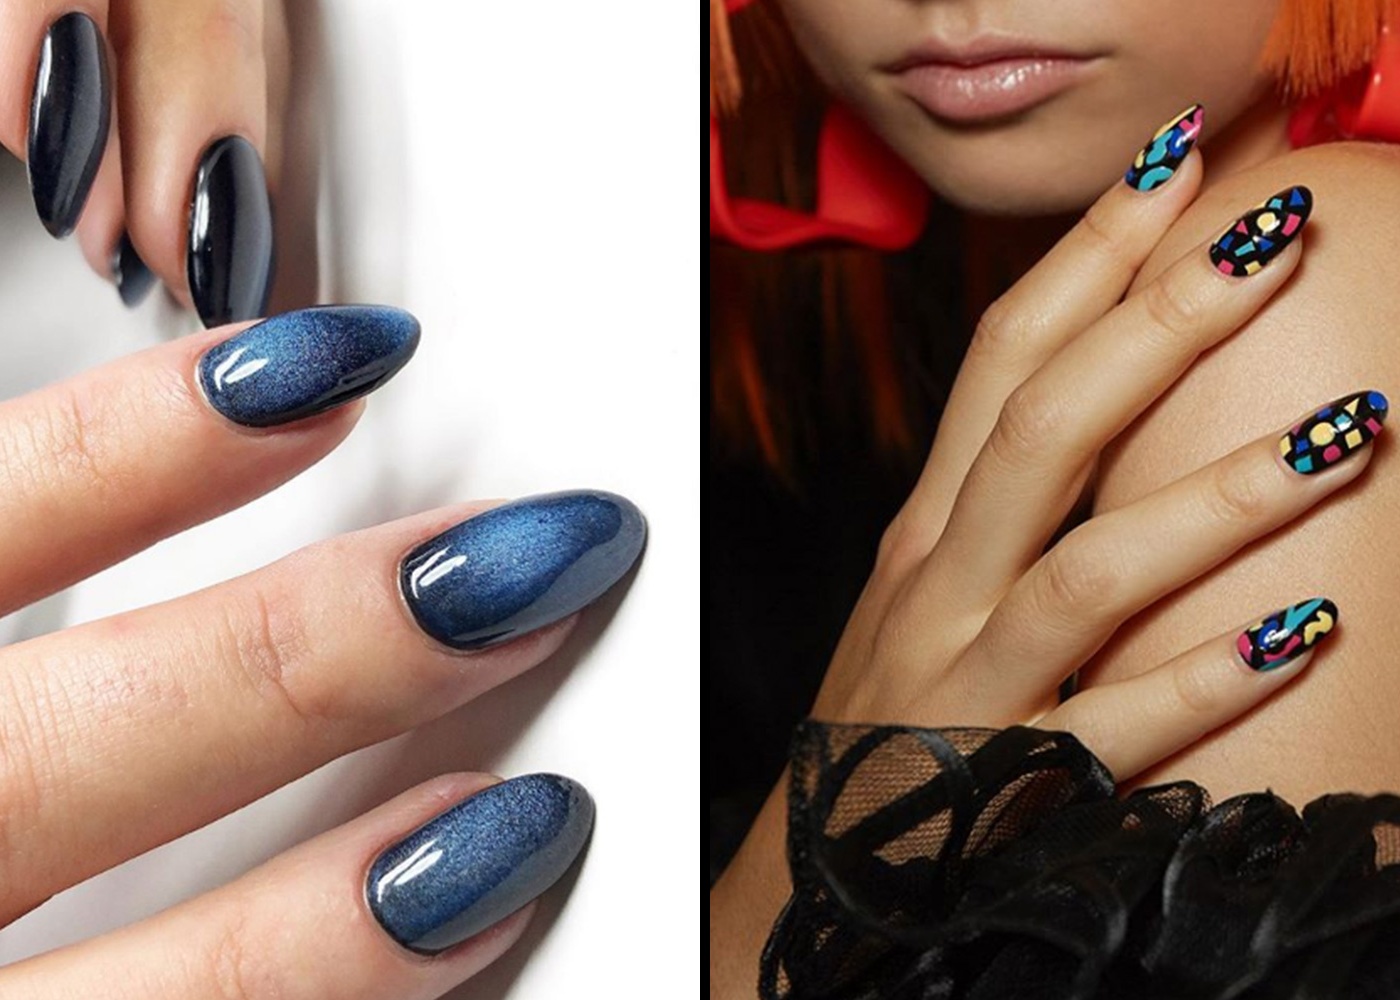 4. Latest Nail Art Trends to Try at Home - wide 1